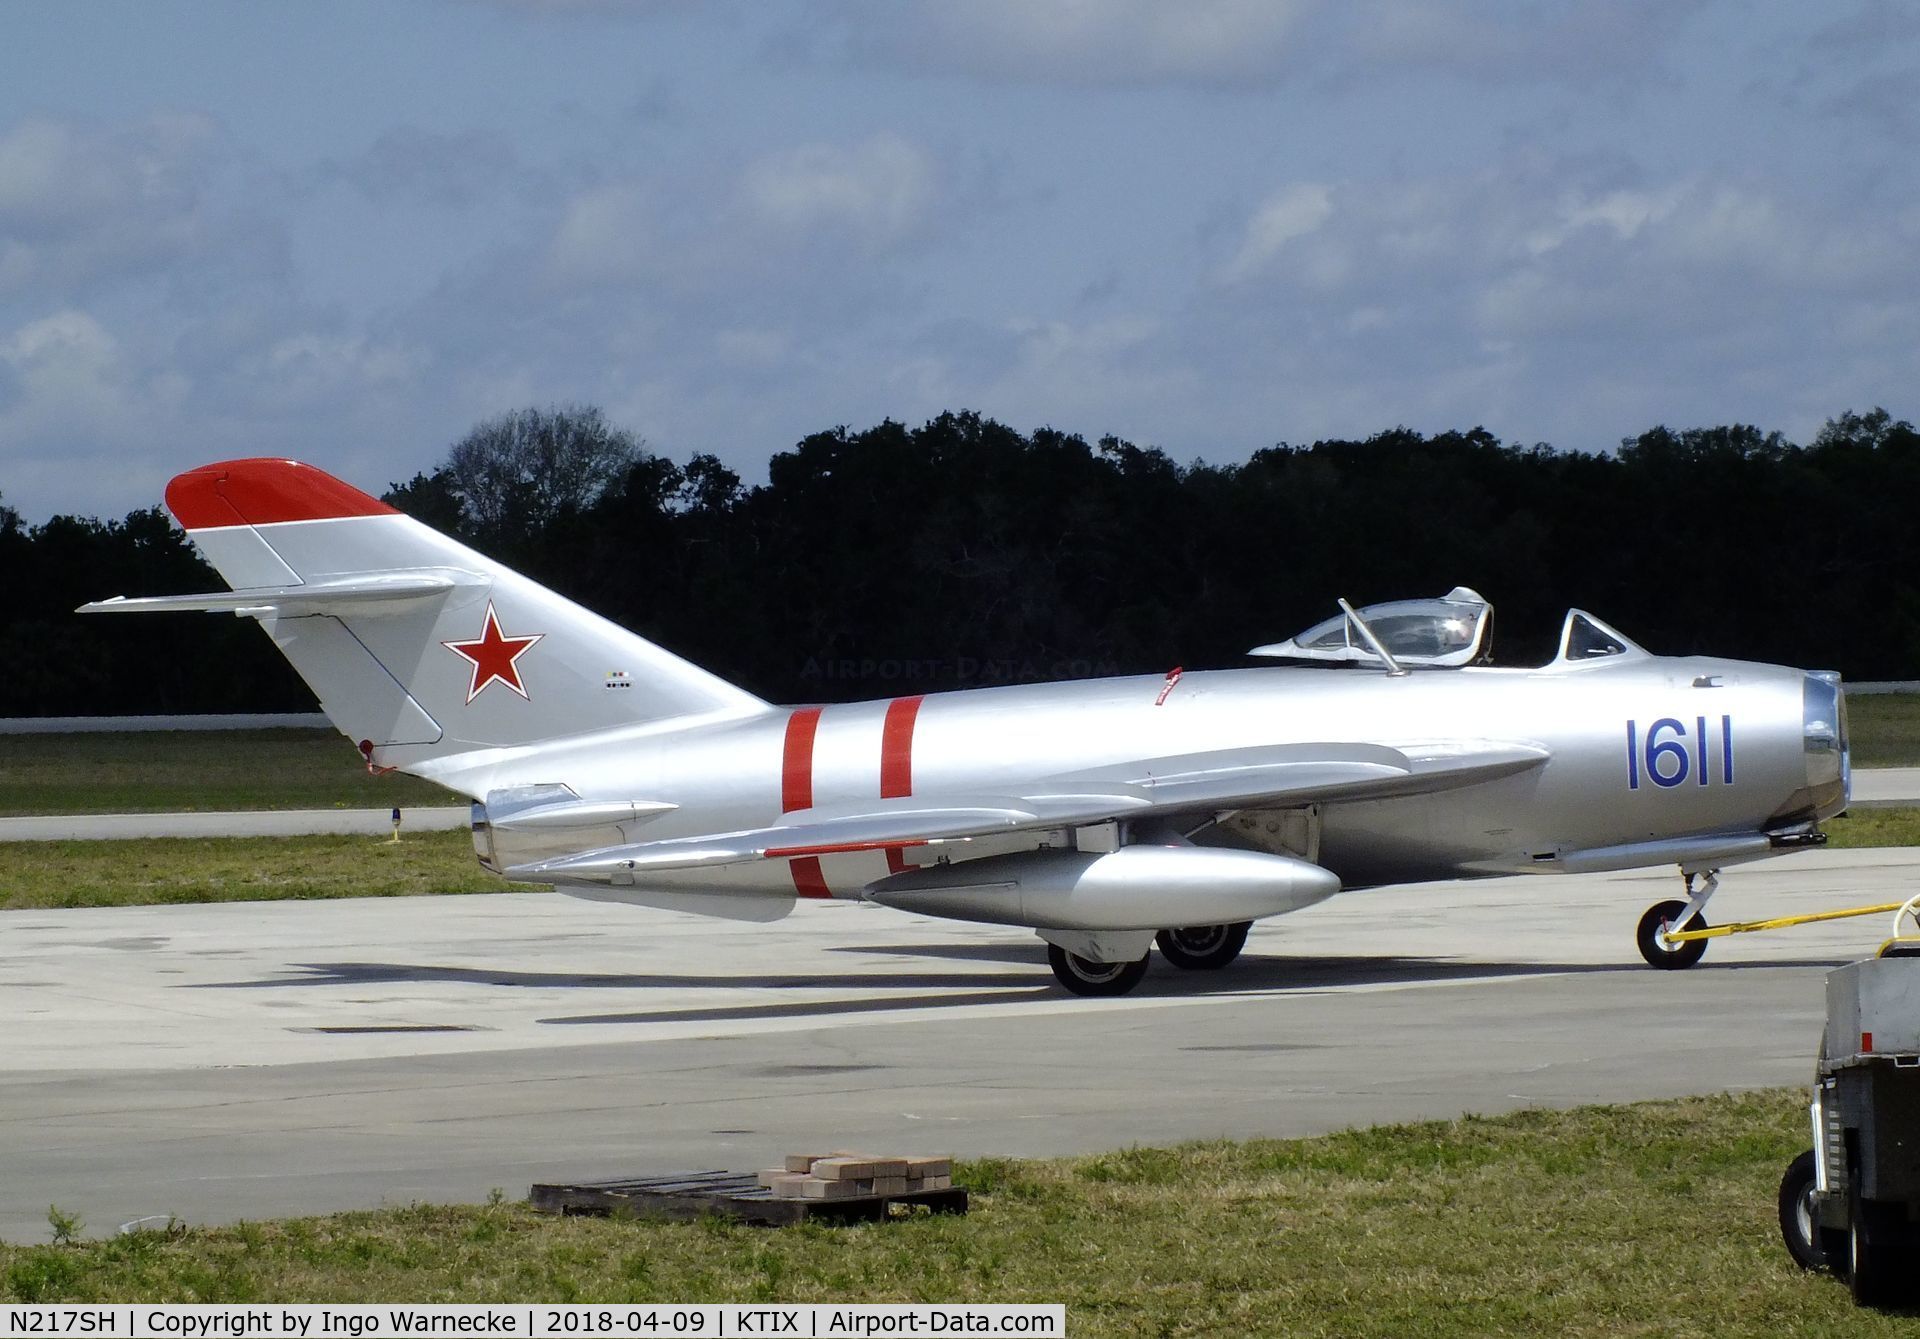 N217SH, 1959 PZL-Mielec Lim-5 (MiG-17F) C/N 1C1611, PZL-Mielec Lim-5 (MiG-17F FRESCO) at Space Coast Regional Airport, Titusville (the day after Space Coast Warbird AirShow 2018)